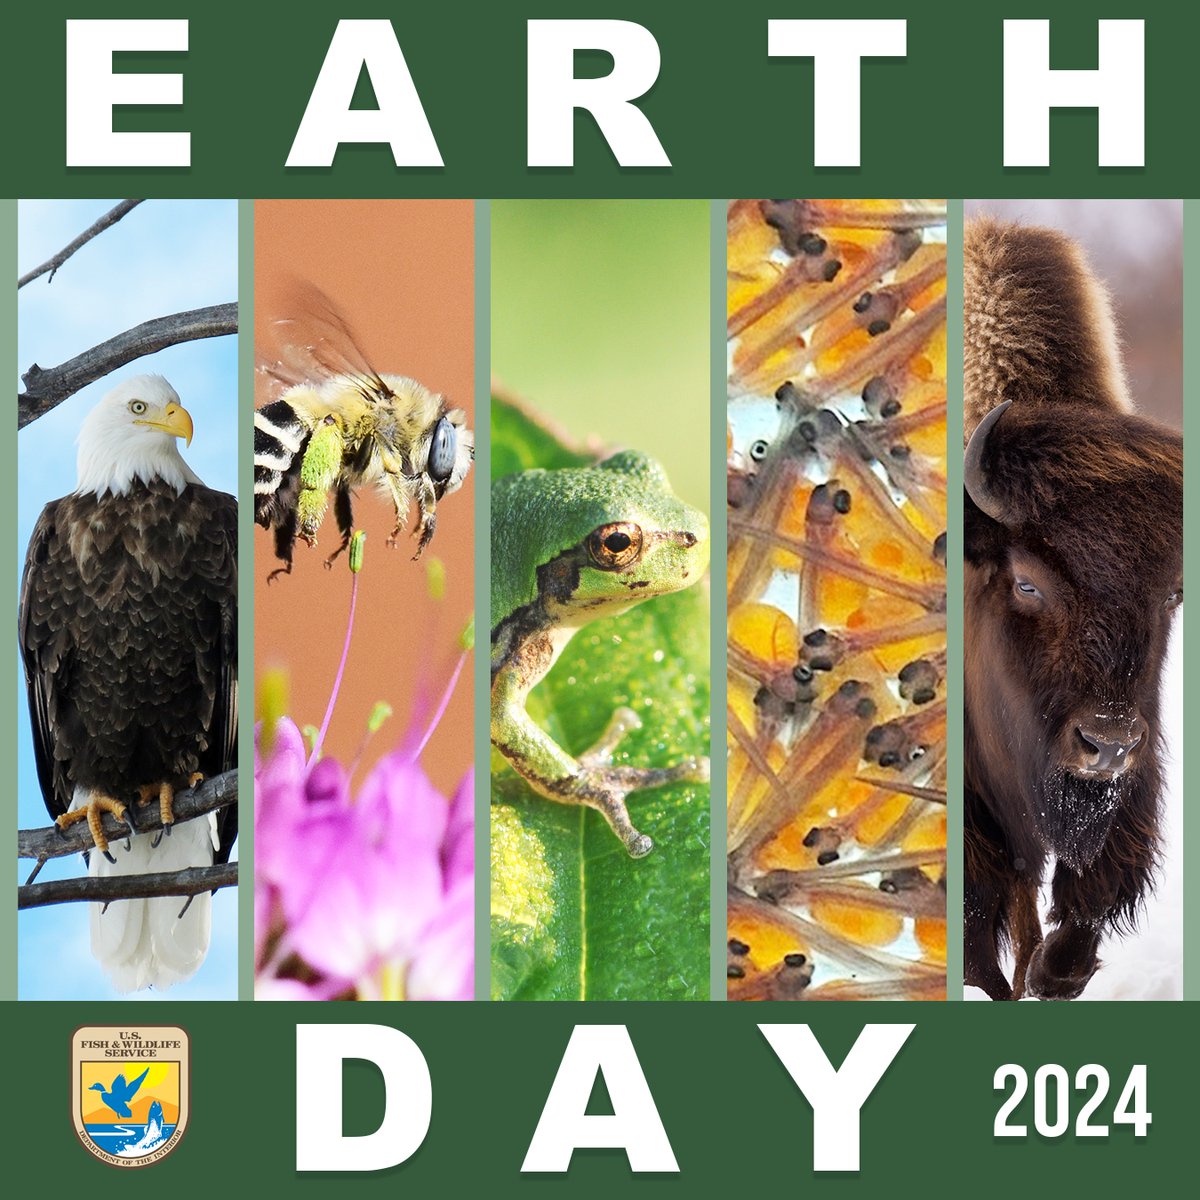 Happy #EarthDay!🌎🌱💚 Since 1970, Earth Day has been observed around the globe as a day to raise environmental awareness. Check out our Earth Day webpage featuring educational tools & resources to help you celebrate Earth Day: ow.ly/FPxV50Rk9Uf 📸Kayt Jonsson/USFWS